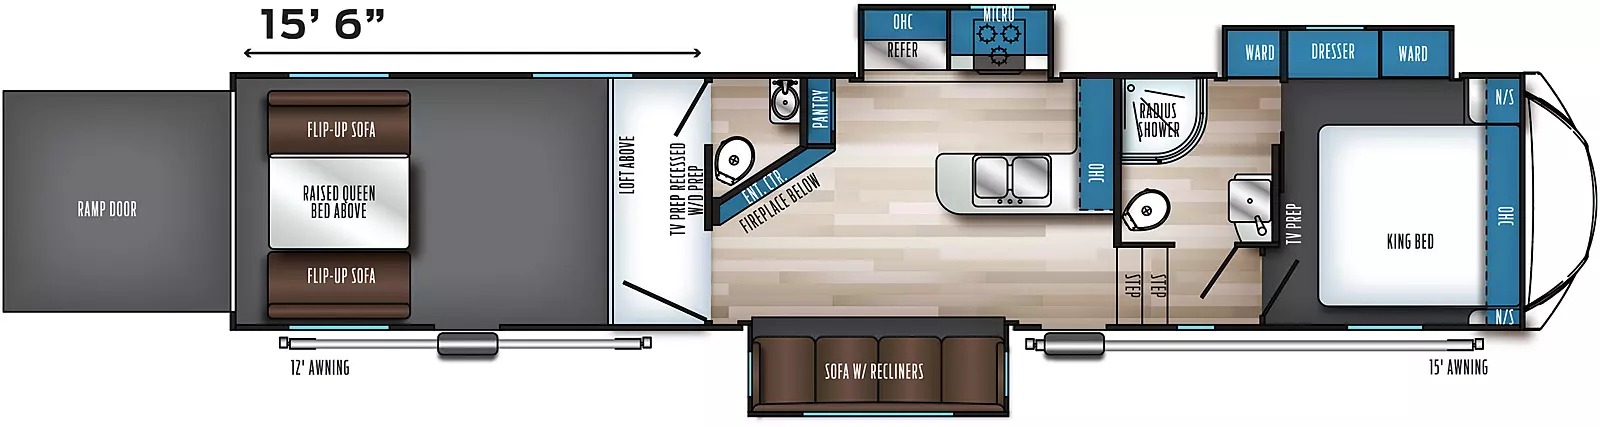 The 383G2 has three slideouts and two entries. Exterior features a rear ramp door, and 12 foot and 15 foot awnings. Interior layout front to back: foot-facing king bed with overhead cabinet and nightstands on each side, off-door side slideout with wardrobes and dresser, and TV prep on inner wall at the foot of the bed; off-door side full pass through bathroom; steps down to main living area and entry; peninsula kitchen counter with sink and overhead cabinet wraps to inner wall; off-door side slideout with cooktop, microwave, overhead cabinet and refrigerator; door side sofa with recliners slideout; pantry and entertainment center with fireplace below along inner wall; rear garage area with half bathroom, loft, second entry, TV prep above recessed washer/dryer prep, and opposing rear flip-up sofas with raised queen bed above. Garage dimensions: 15 foot 6 inches from rear to half bathroom wall.